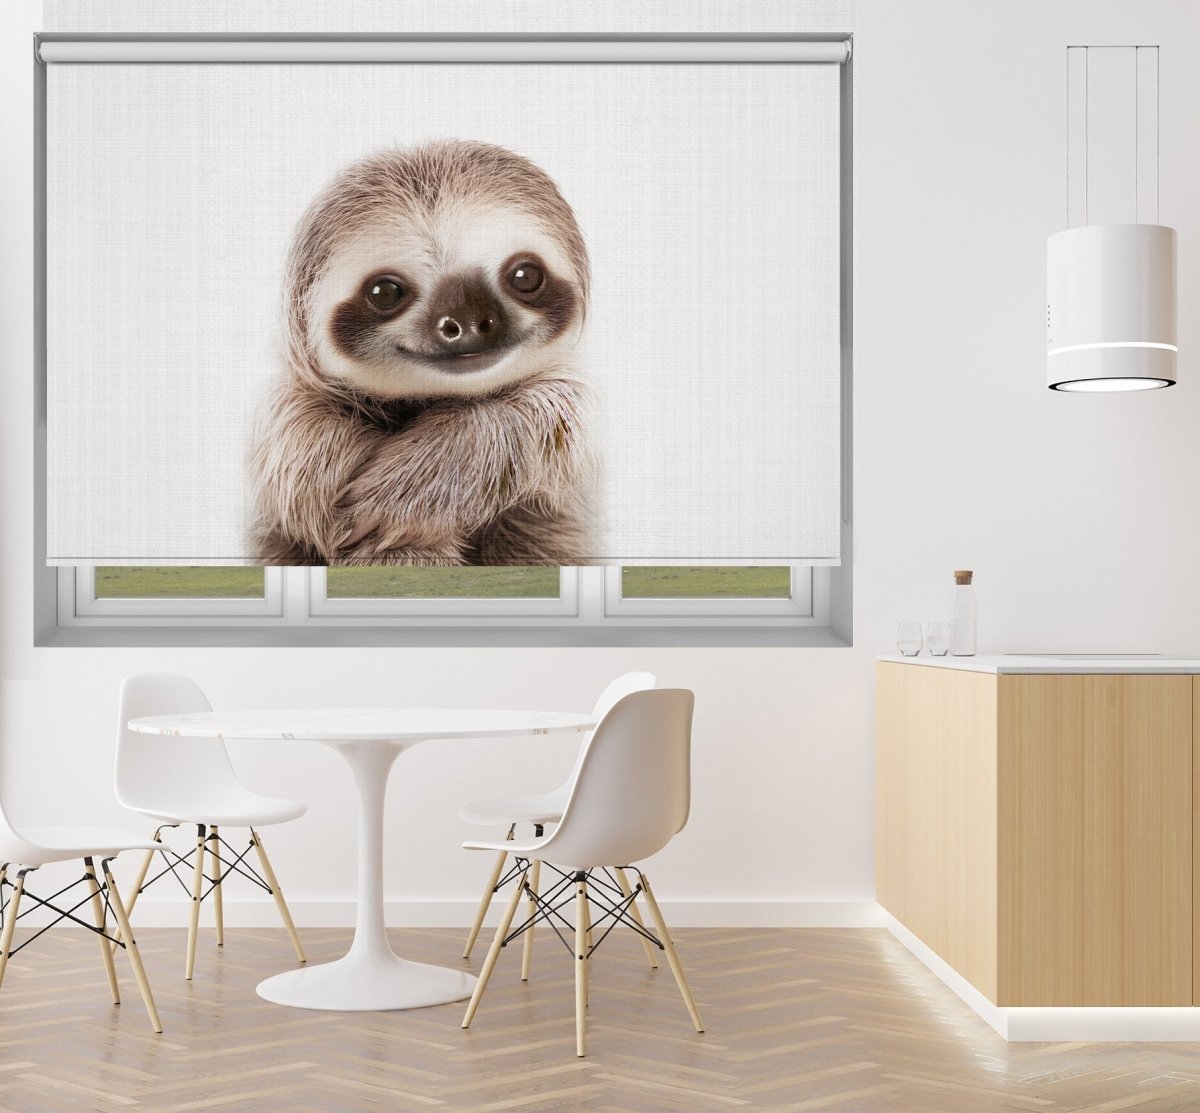 Peekaboo Baby Sloth Printed Picture Photo Roller Blind - 1X2646682 - Art Fever - Art Fever